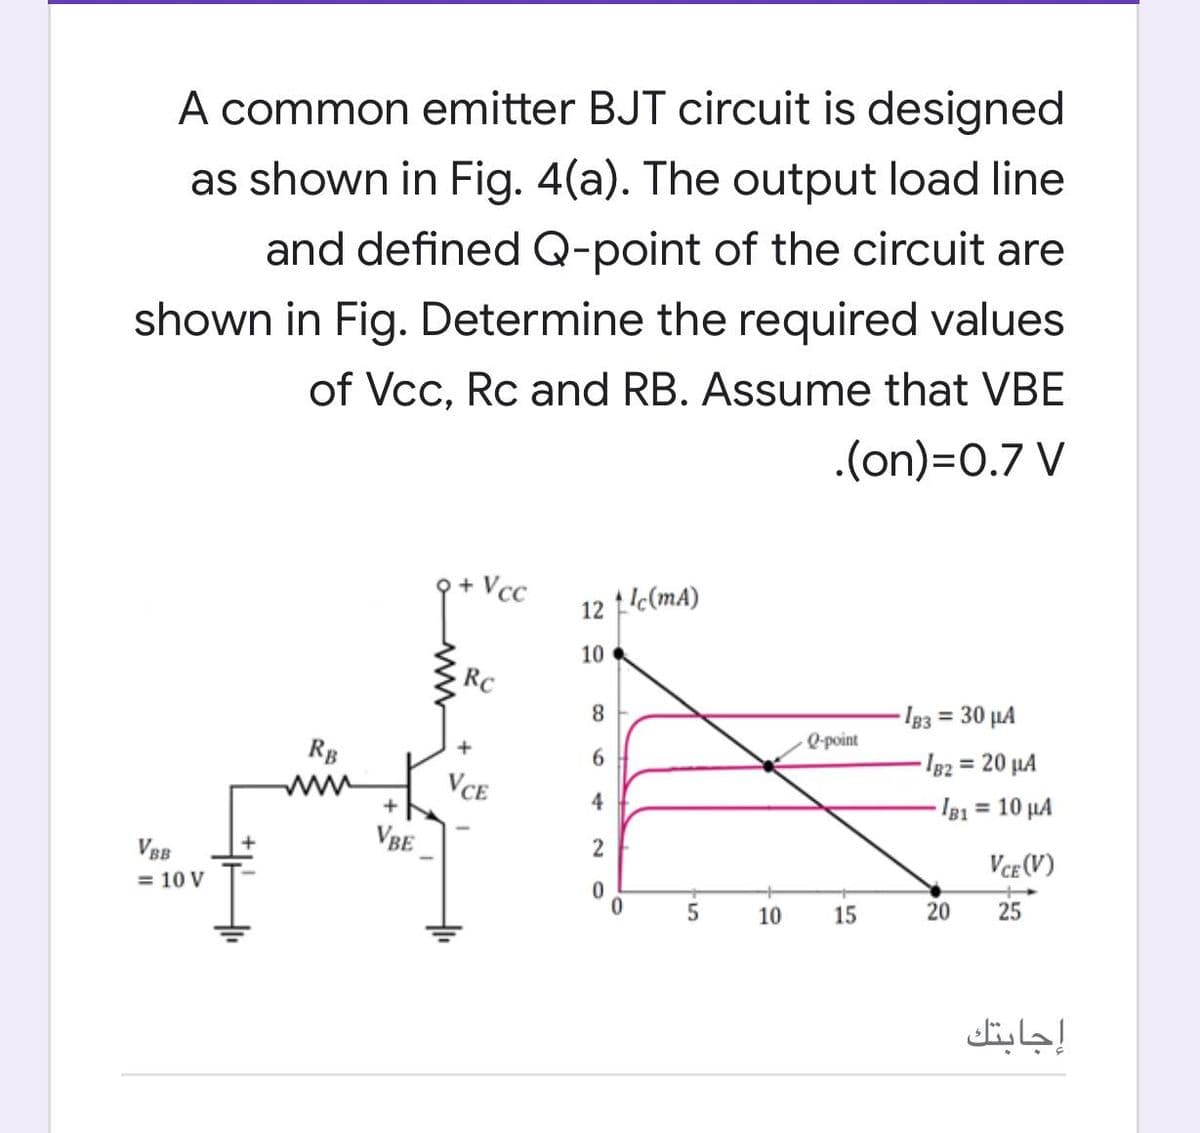 A common emitter BJT circuit is designed
as shown in Fig. 4(a). The output load line
and defined Q-point of the circuit are
shown in Fig. Determine the required values
of Vcc, Rc and RB. Assume that VBE
.(on)=0.7 V
Vc
12 1c(mA)
10
RC
8.
IB3 = 30 µA
Q-point
RB
ww
6.
I82 = 20 µA
%3D
VCE
4
Ig1 = 10 µA
VBE
VBB
VCE (V)
= 10 V
10
15
20
25
إجابتك
